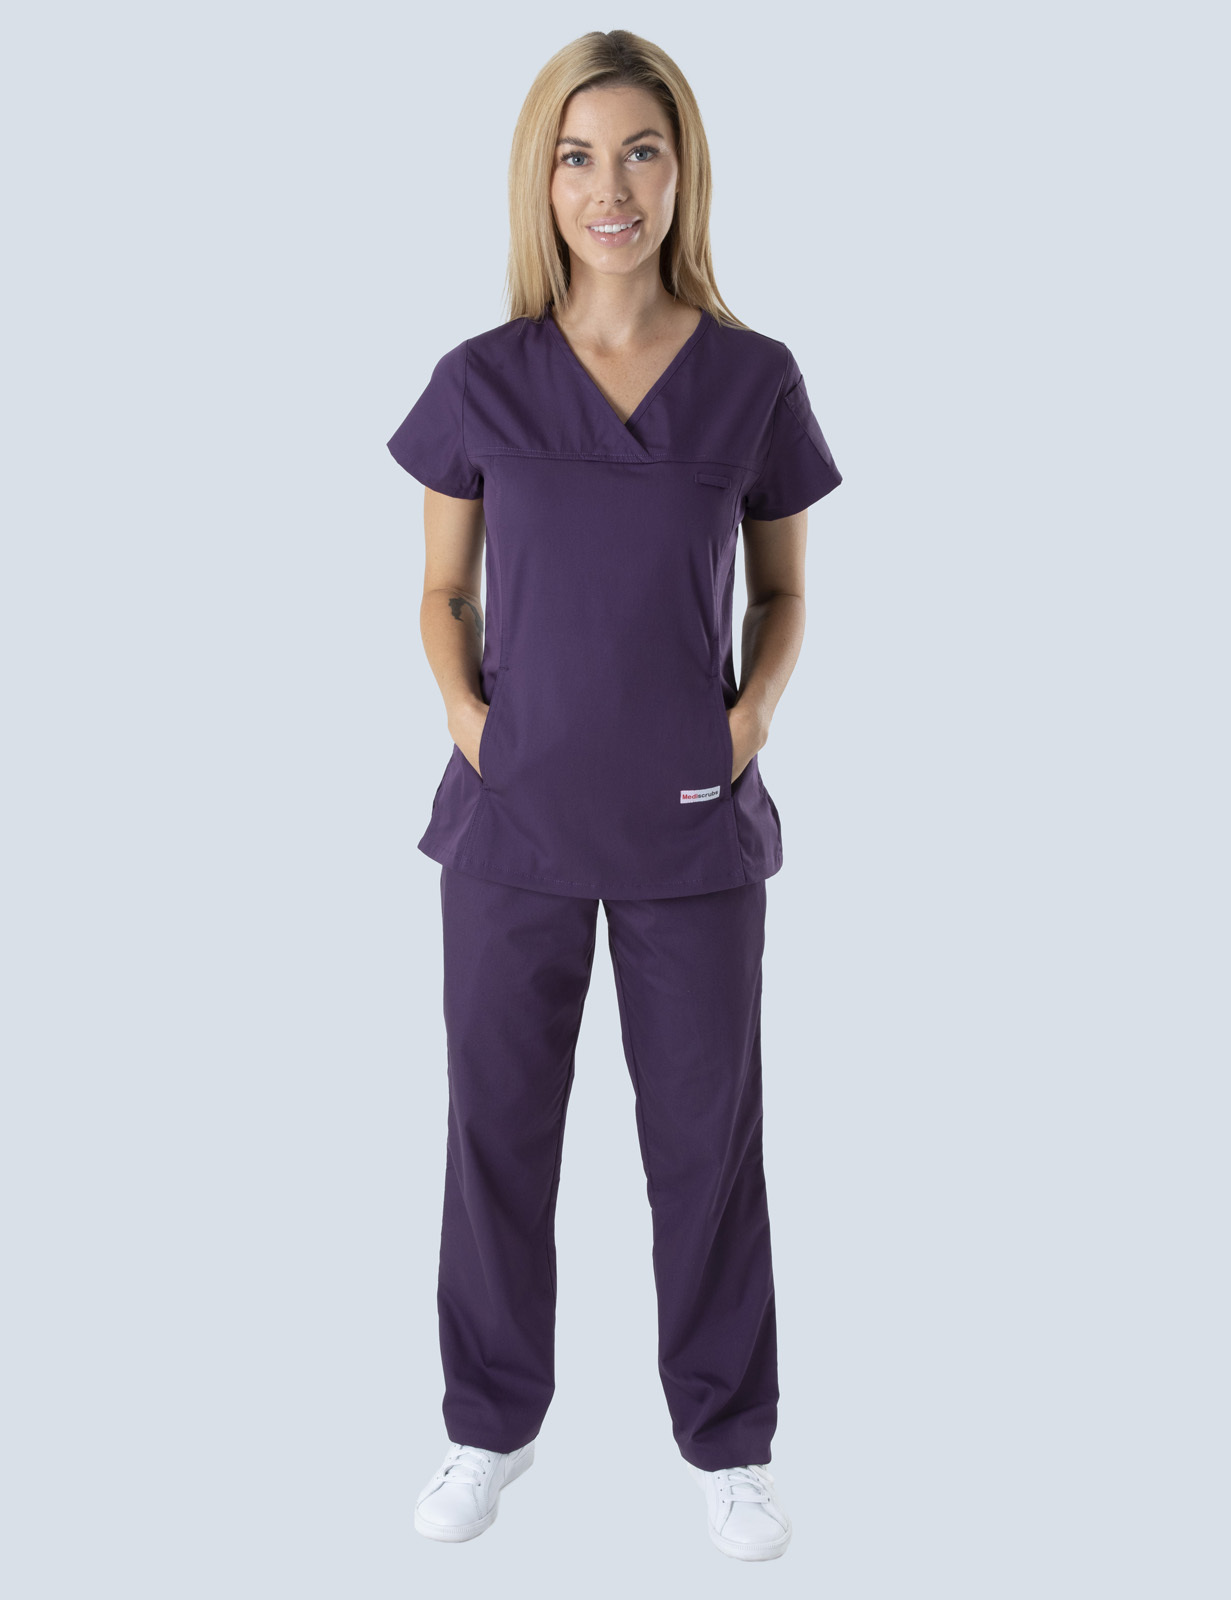 Prince Charles Hospital - ED Clinical Nurse (Women's Fit Solid Scrub Top and Cargo Pants in Aubergine incl Logos)